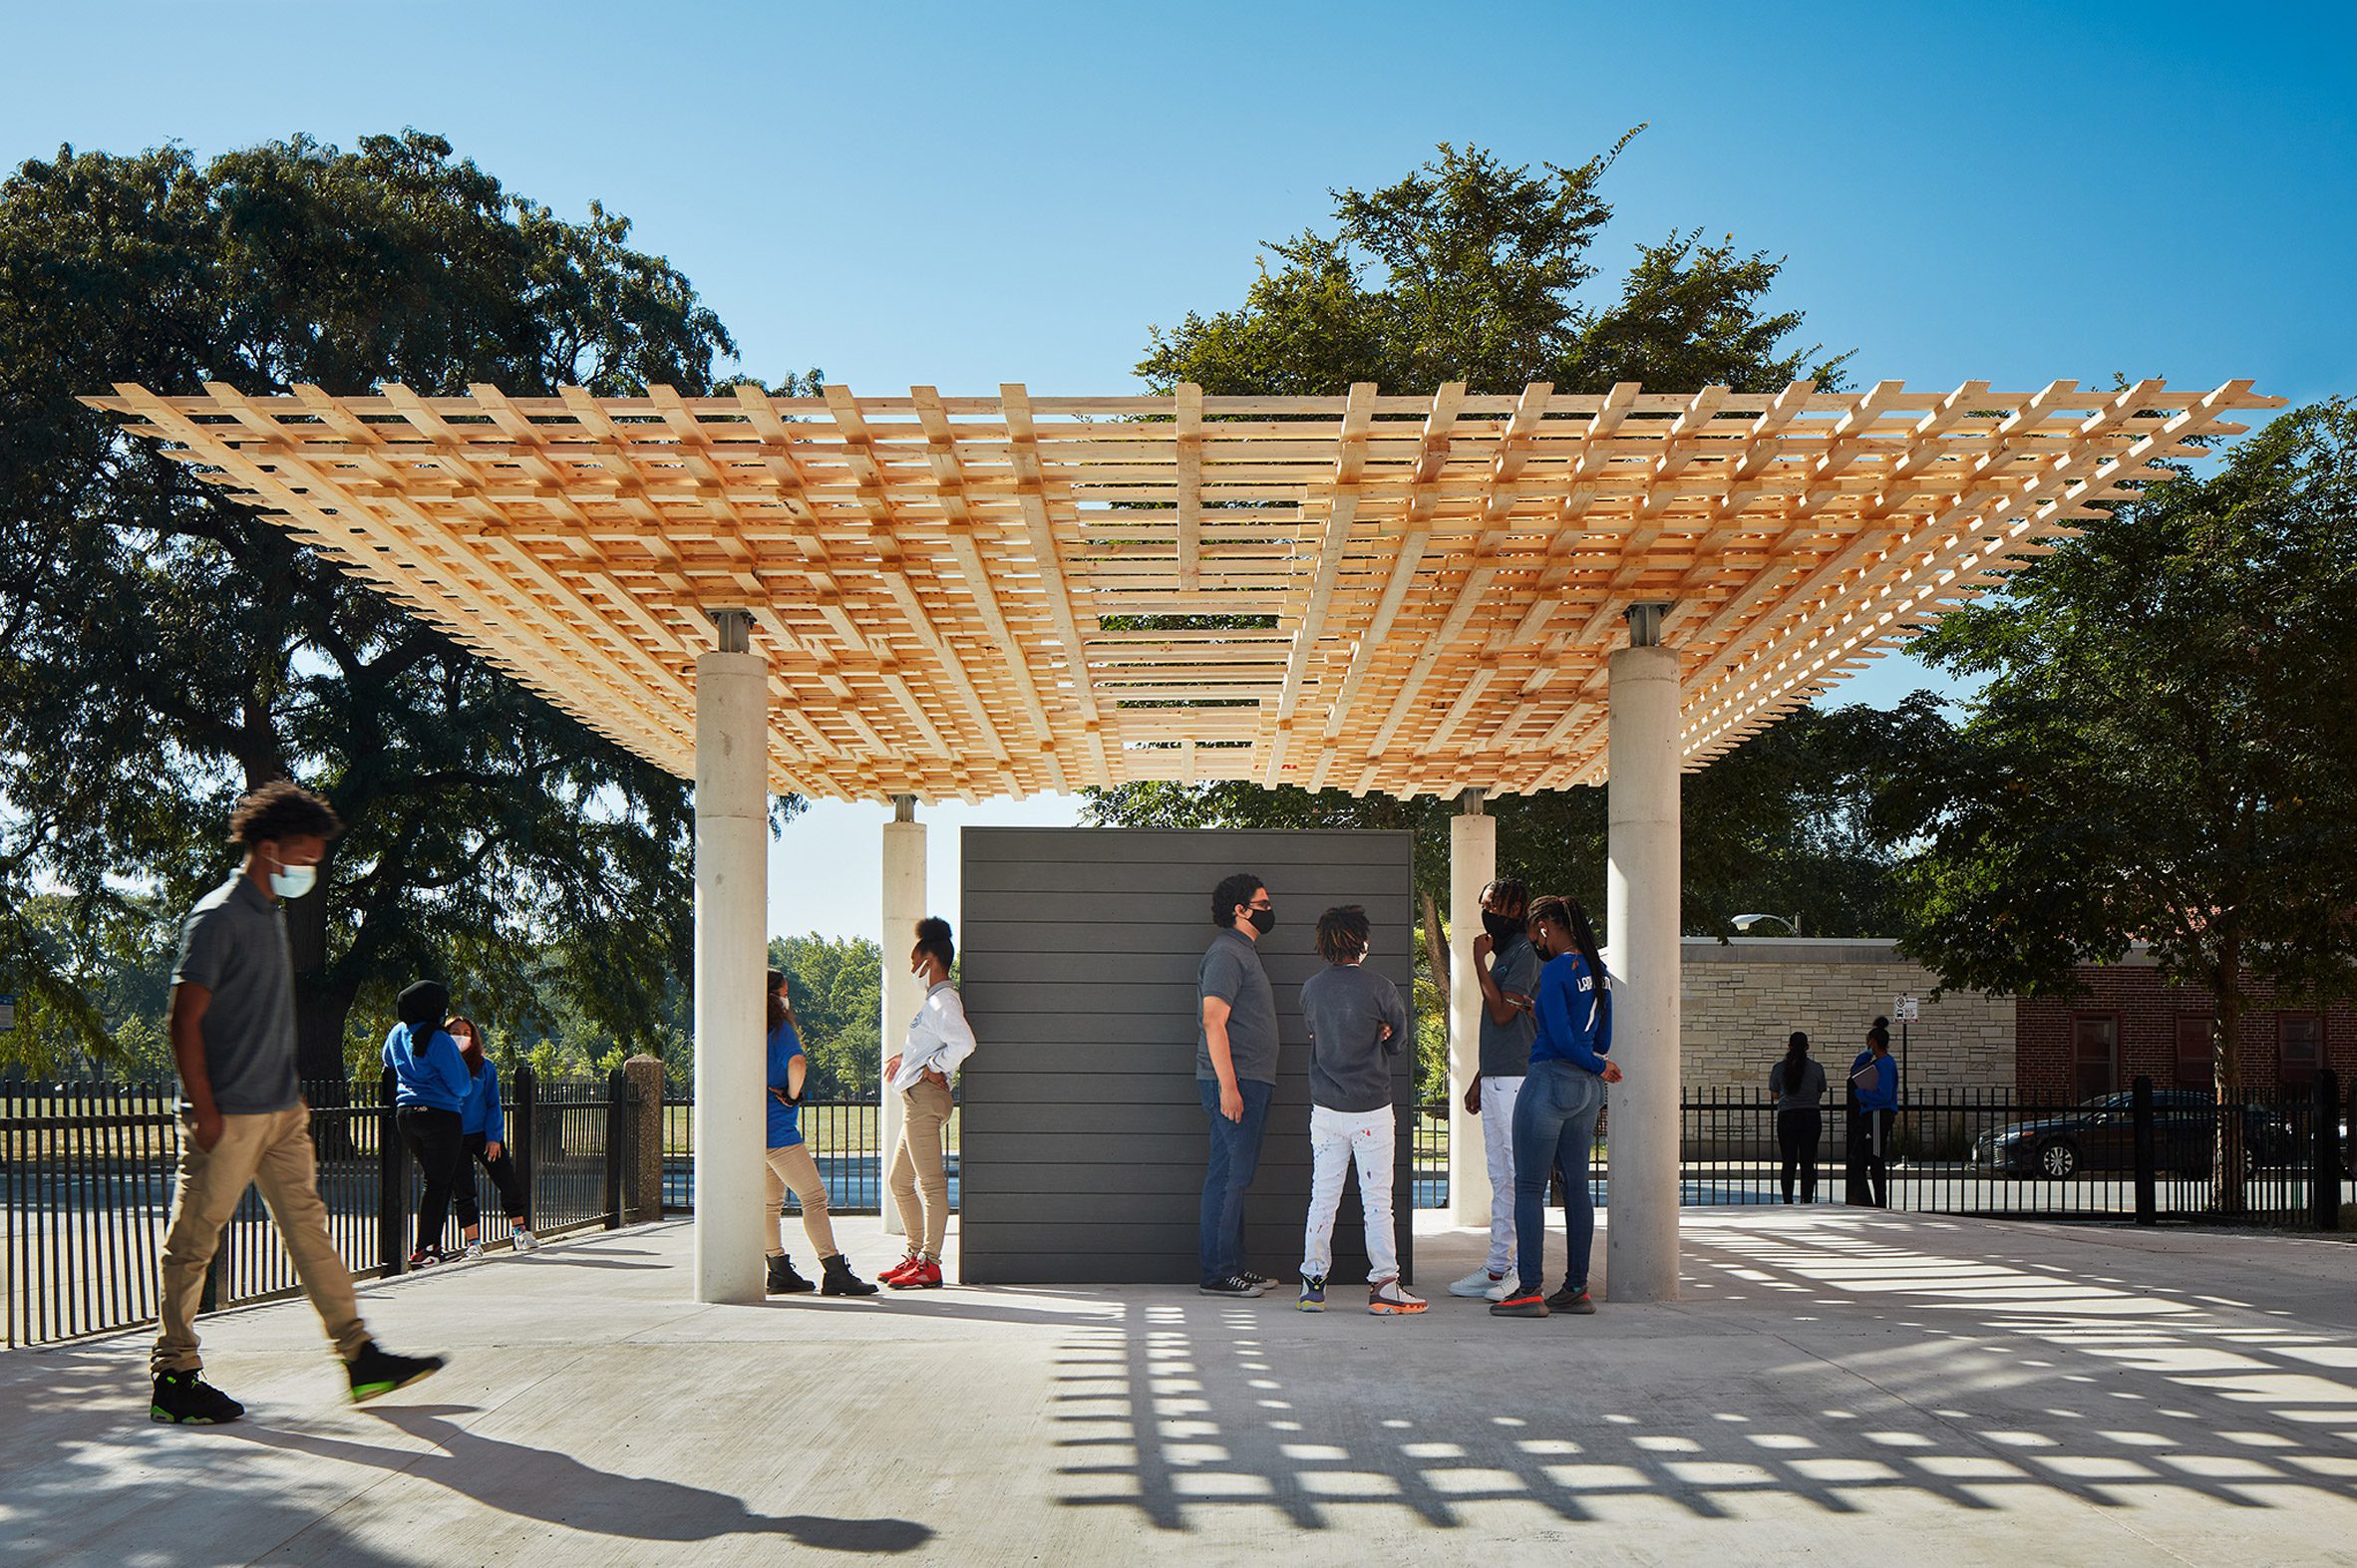 Students stand under the interlocking timber roof of the SPLAM pavilion